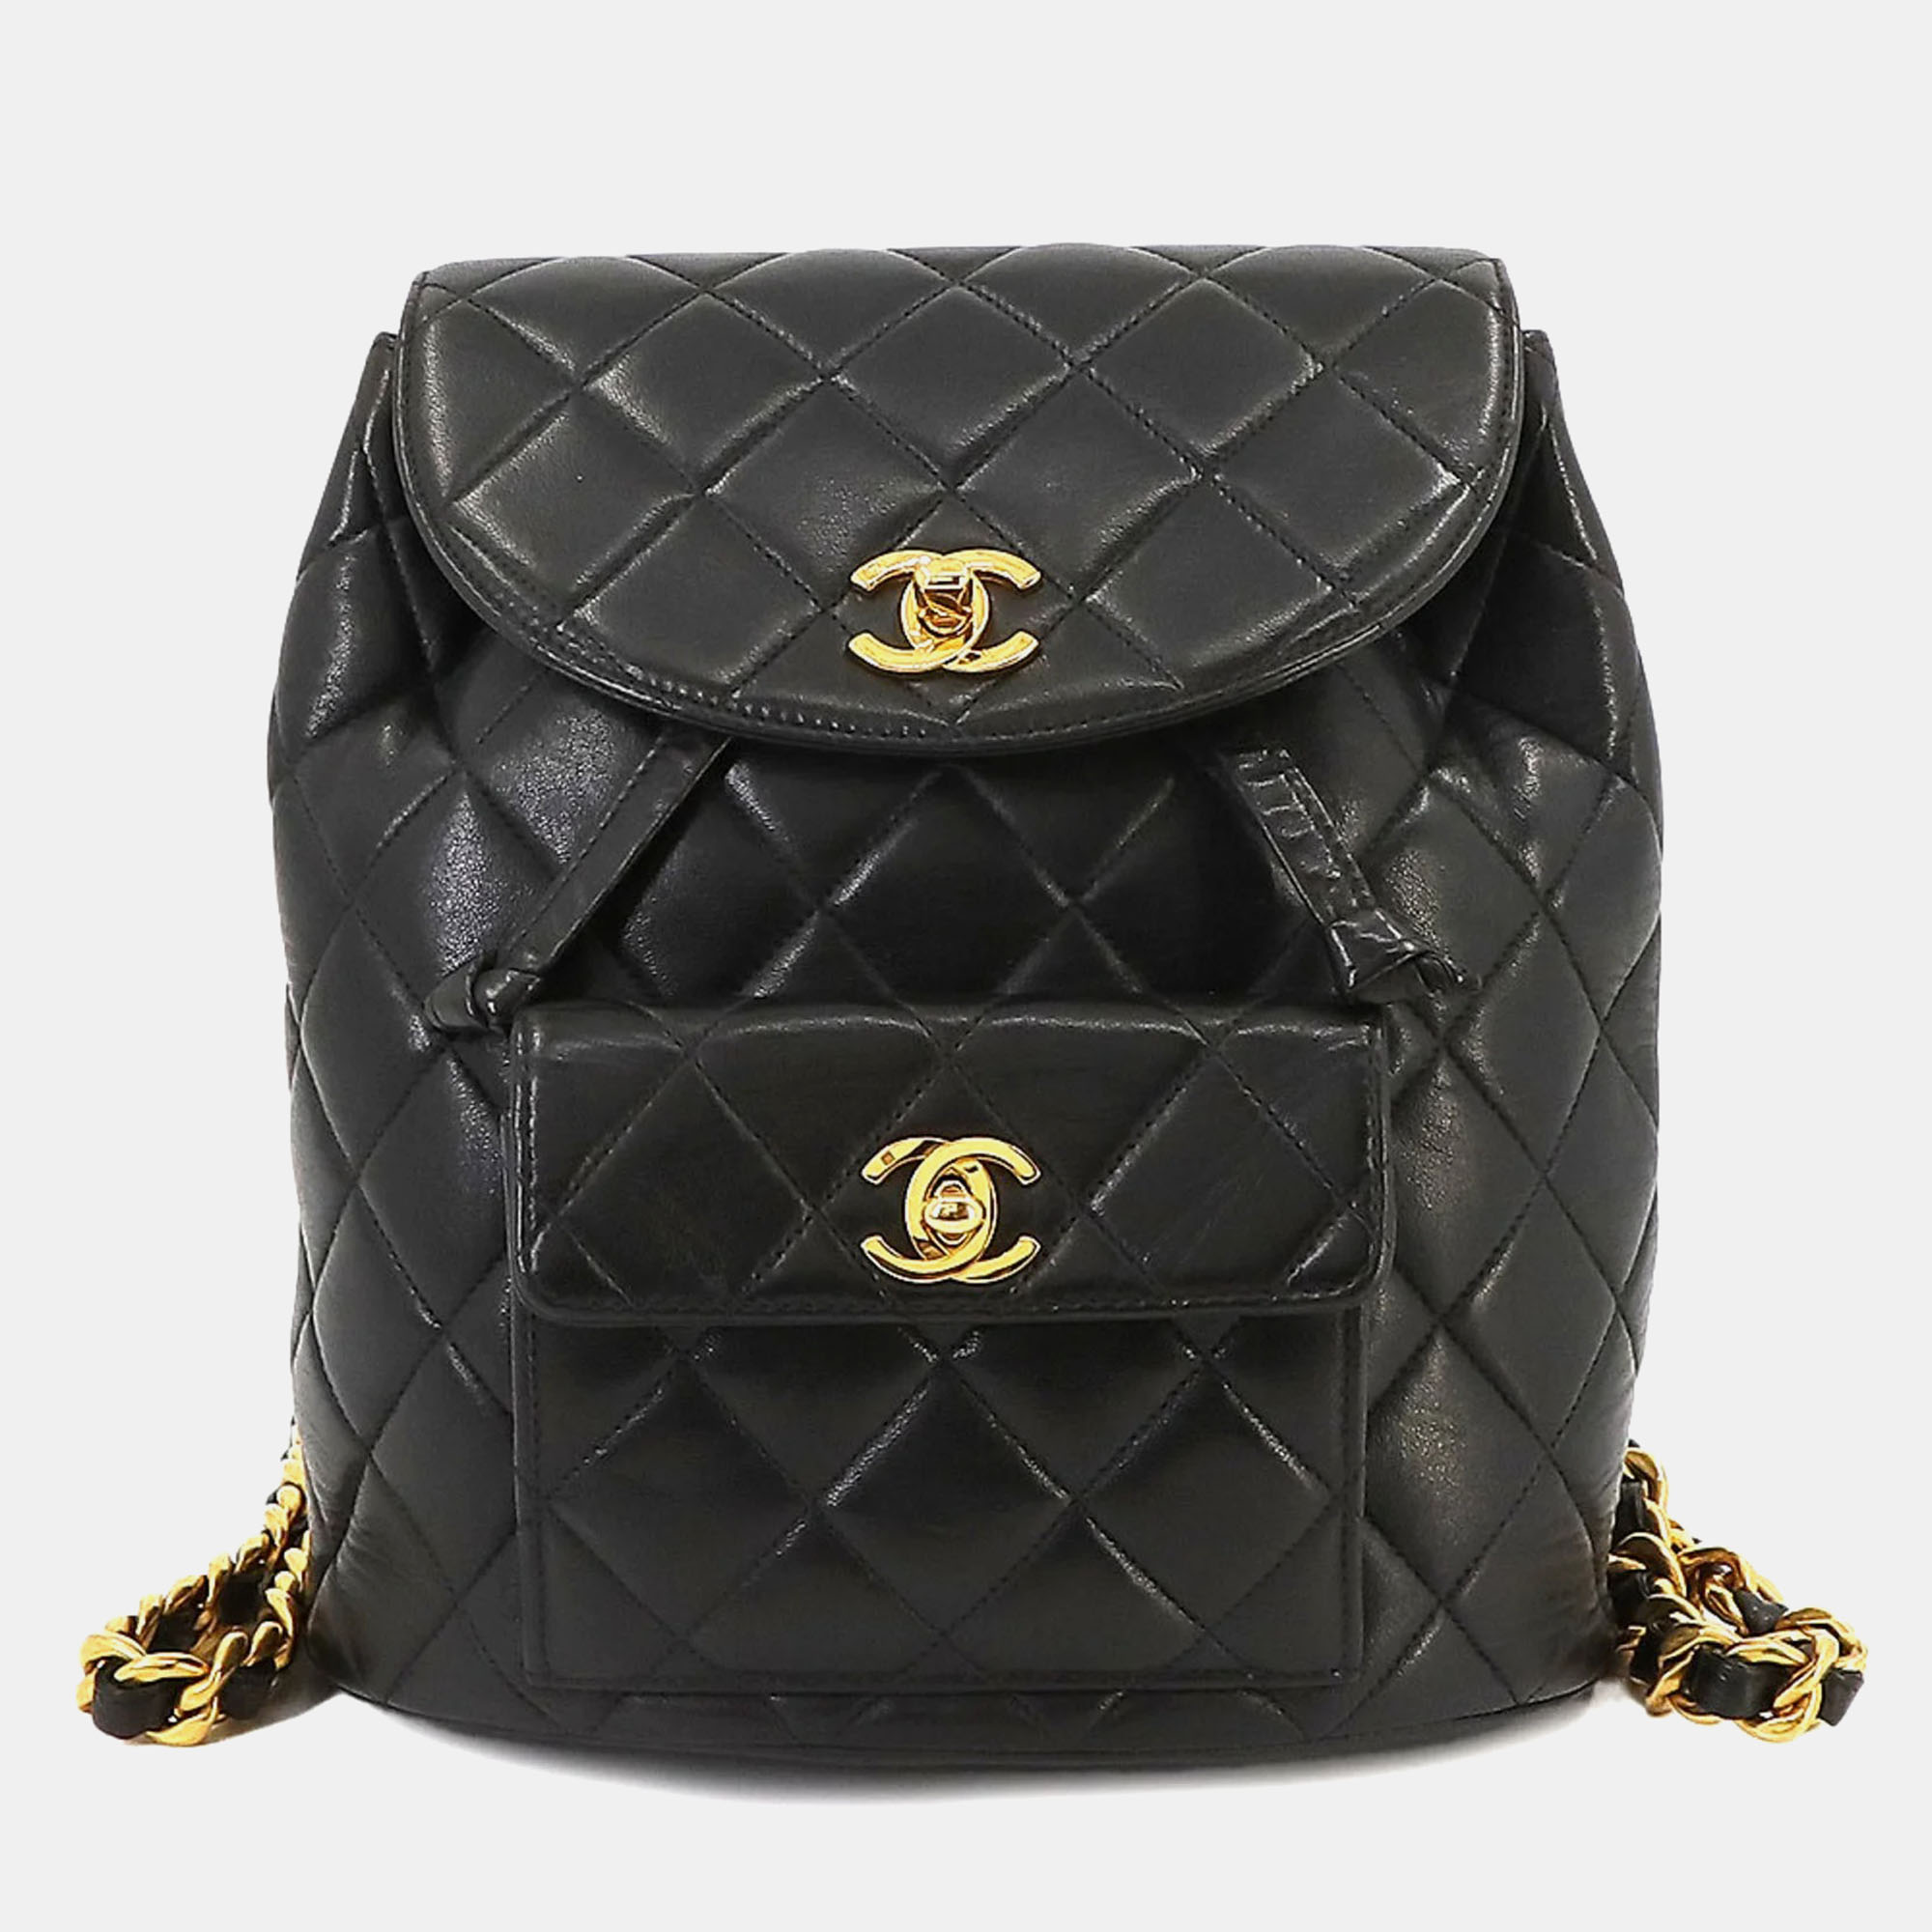 Chanel black leather quilted duma backpack